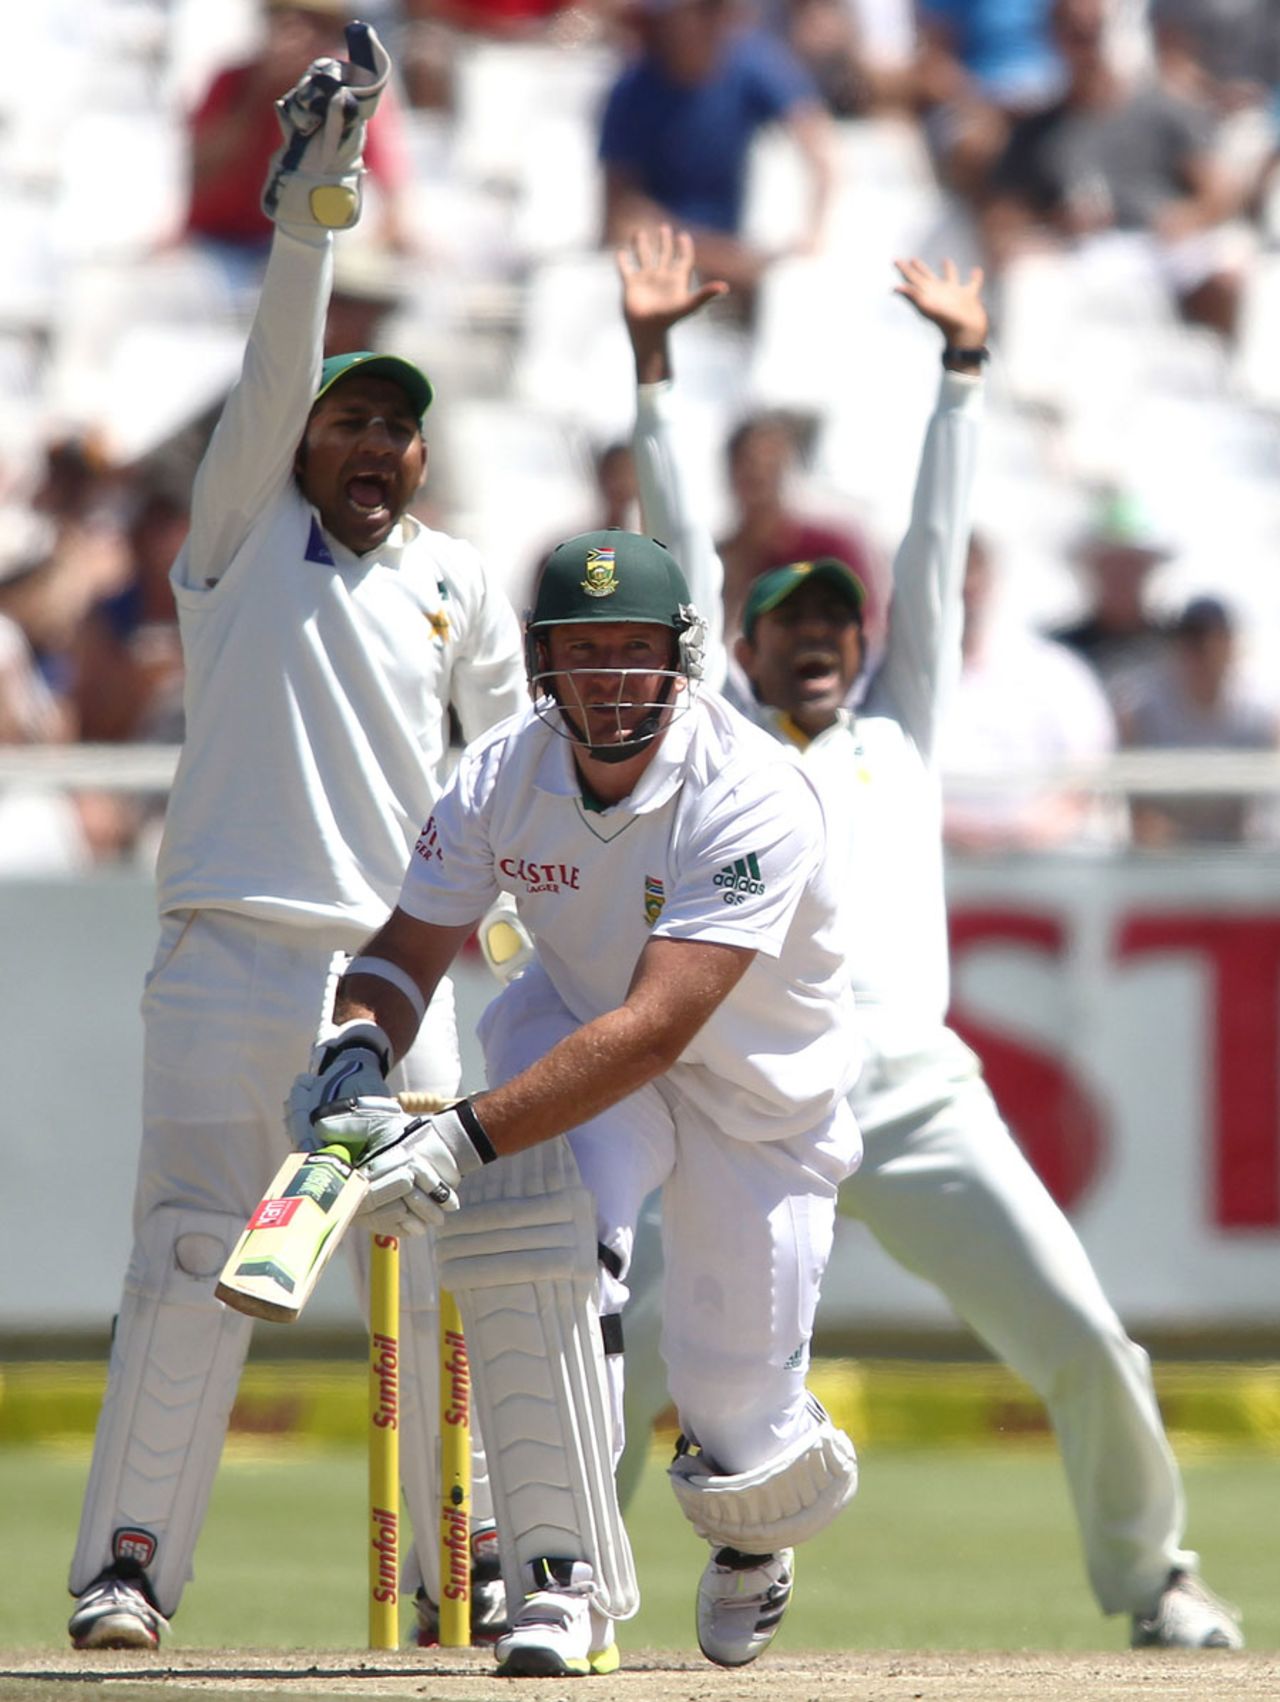 Graeme Smith was trapped lbw for 19, South Africa v Pakistan, 2nd Test, Cape Town, 2nd day, February 15, 2013